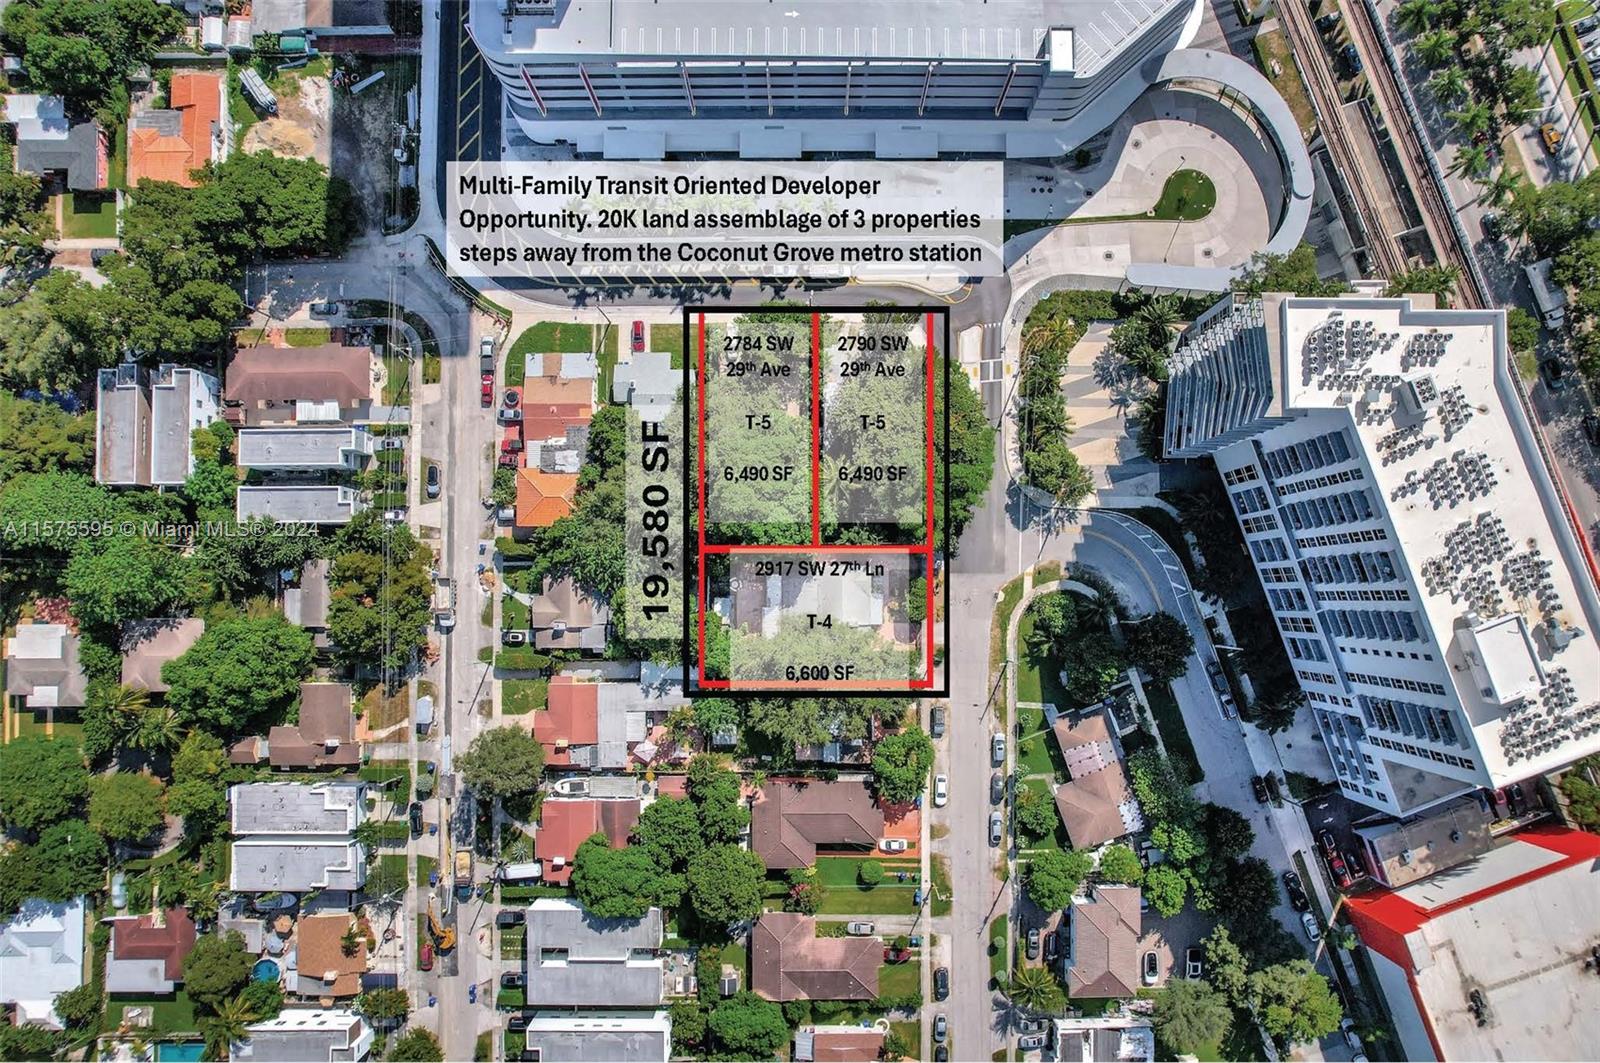 2790 SW 29th Ave, Miami, Florida 33133, ,Land,For Sale,2790 SW 29th Ave,A11575595